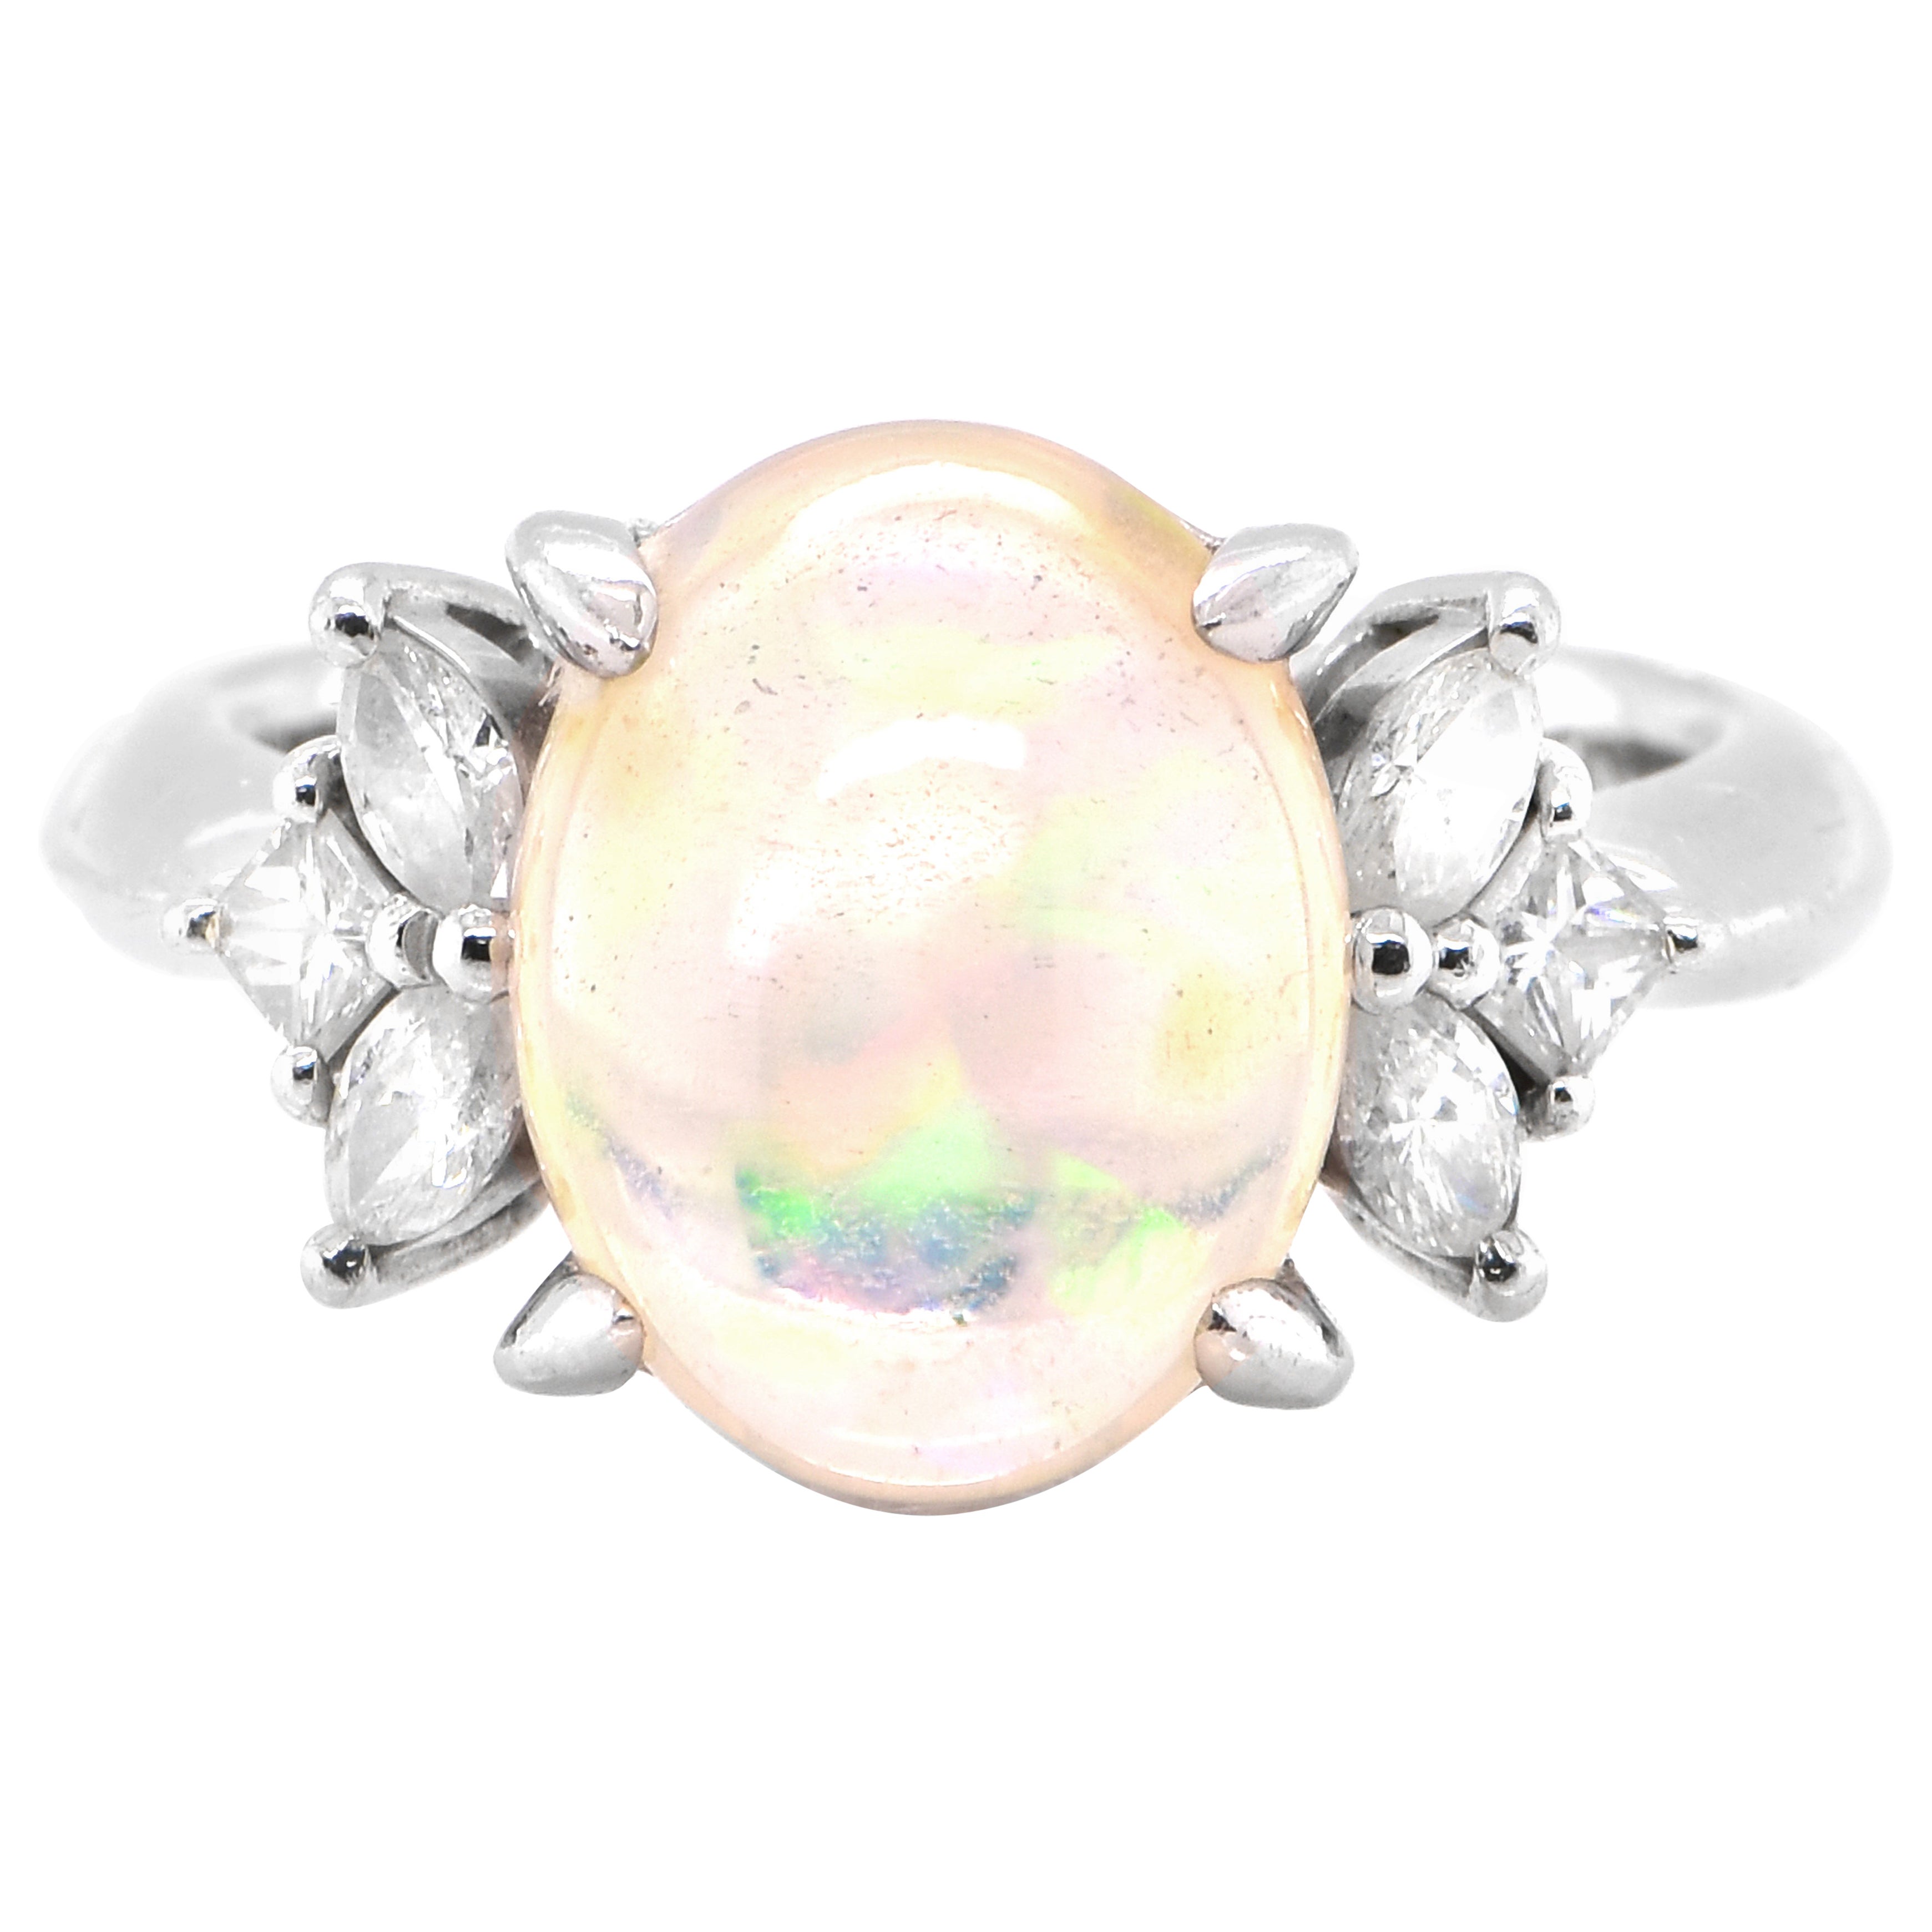 4.17 Carat Natural Water Opal and Diamond Cocktail Ring Set in Platinum For Sale